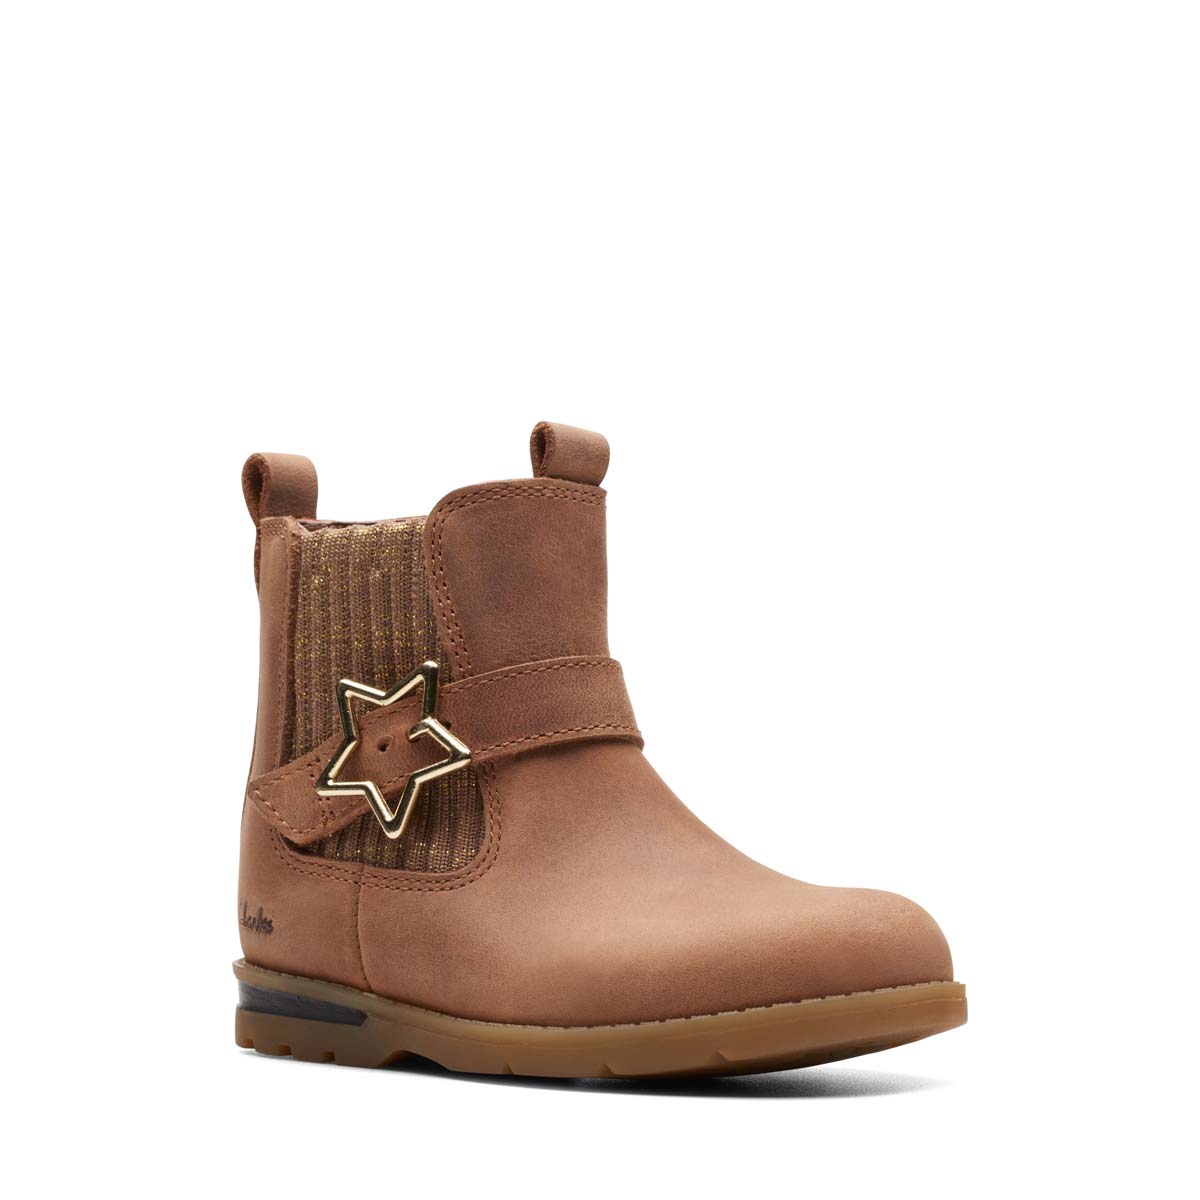 Clarks Dabi Star T Tan Leather Kids Toddler Girls Boots 7489-46F in a Plain Leather in Size 4